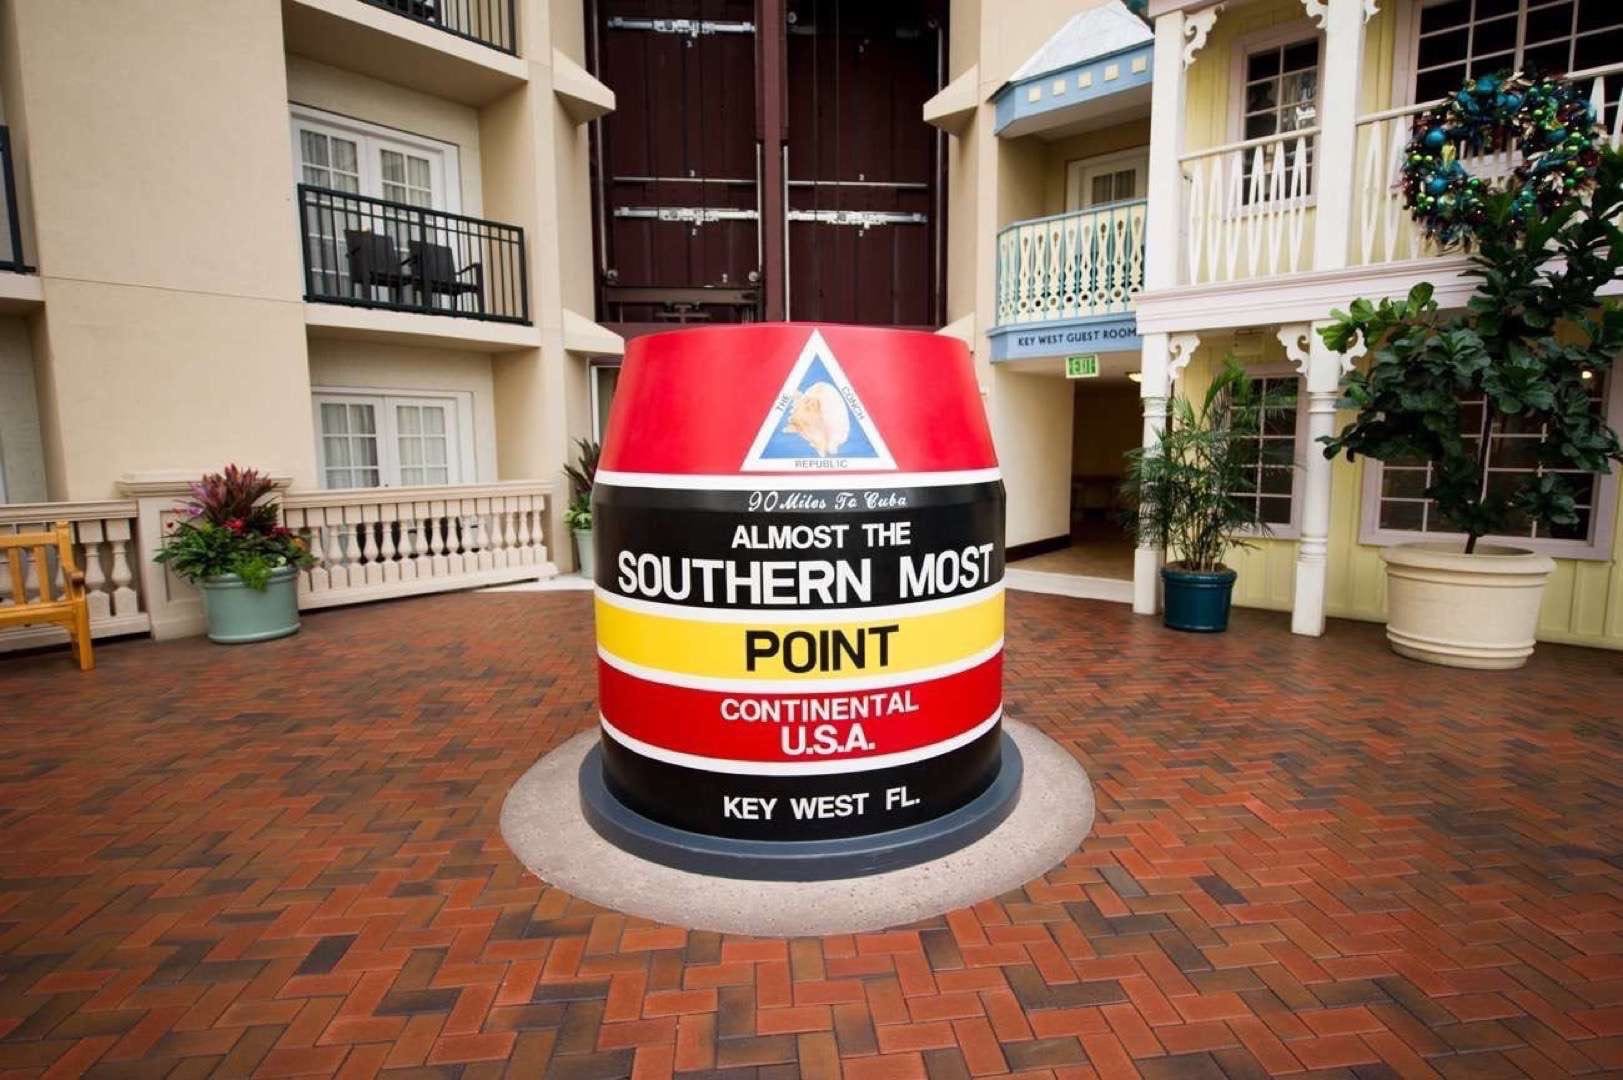 IU C&I Studios Portfolio Gaylord Palms Resort and Convention Center Interior showing a marker for almost the southern most point in USA.